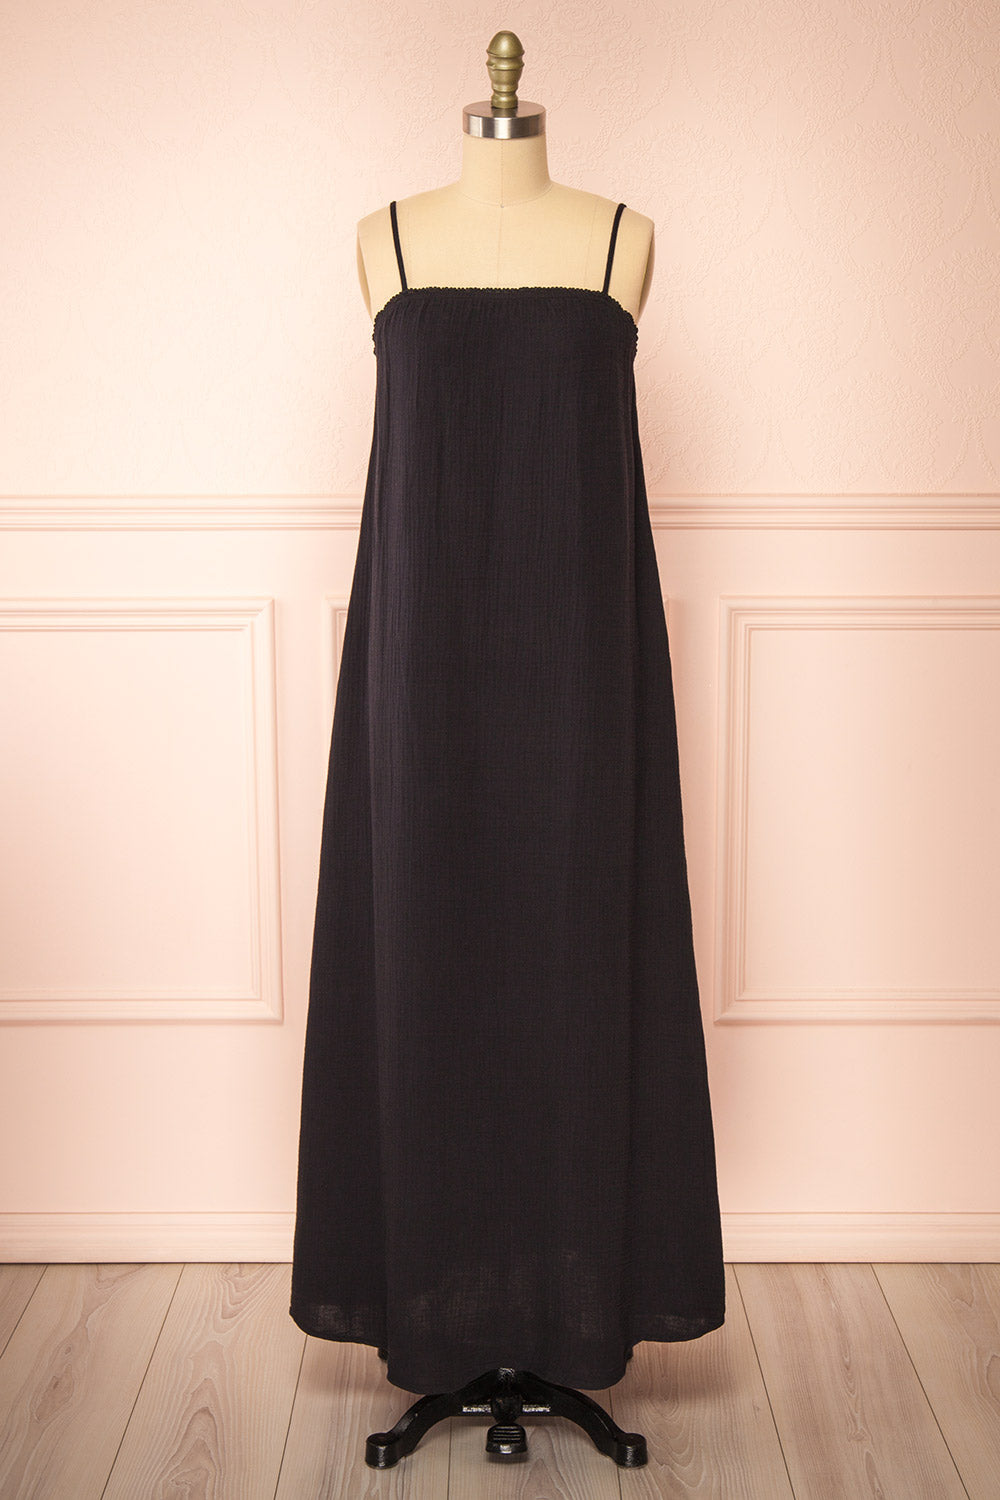 Marinet Black Long Loose-Fitted Dress | Boutique 1861 front view 